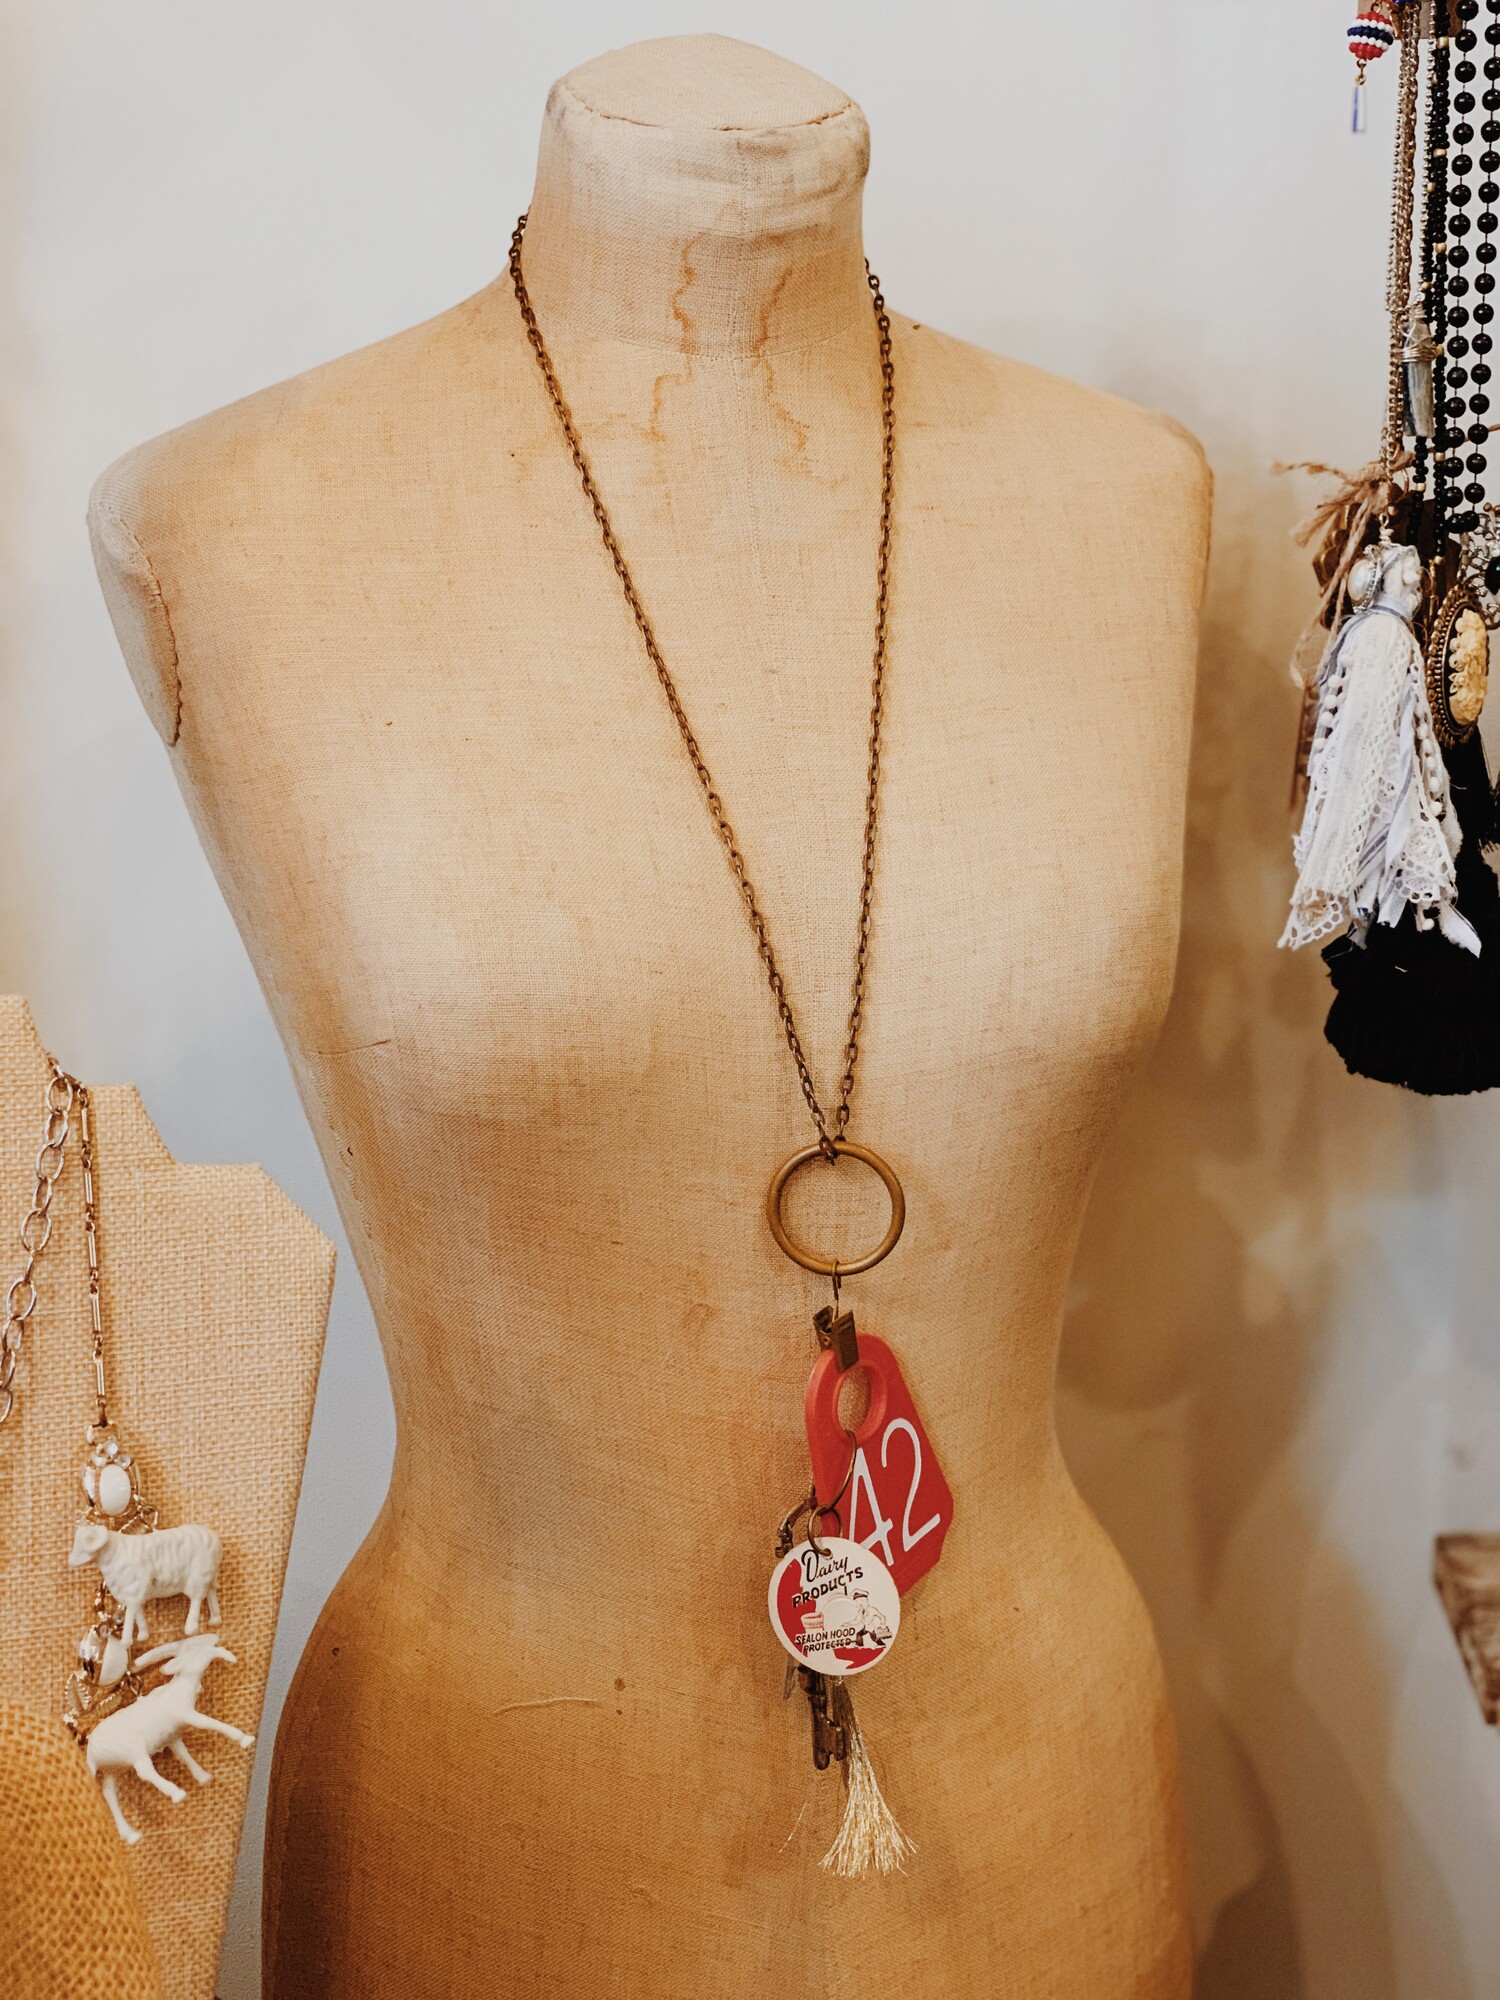 This one of a kind, handmade necklace is the perfect way to stand out! It measures 23.5 inches long total.